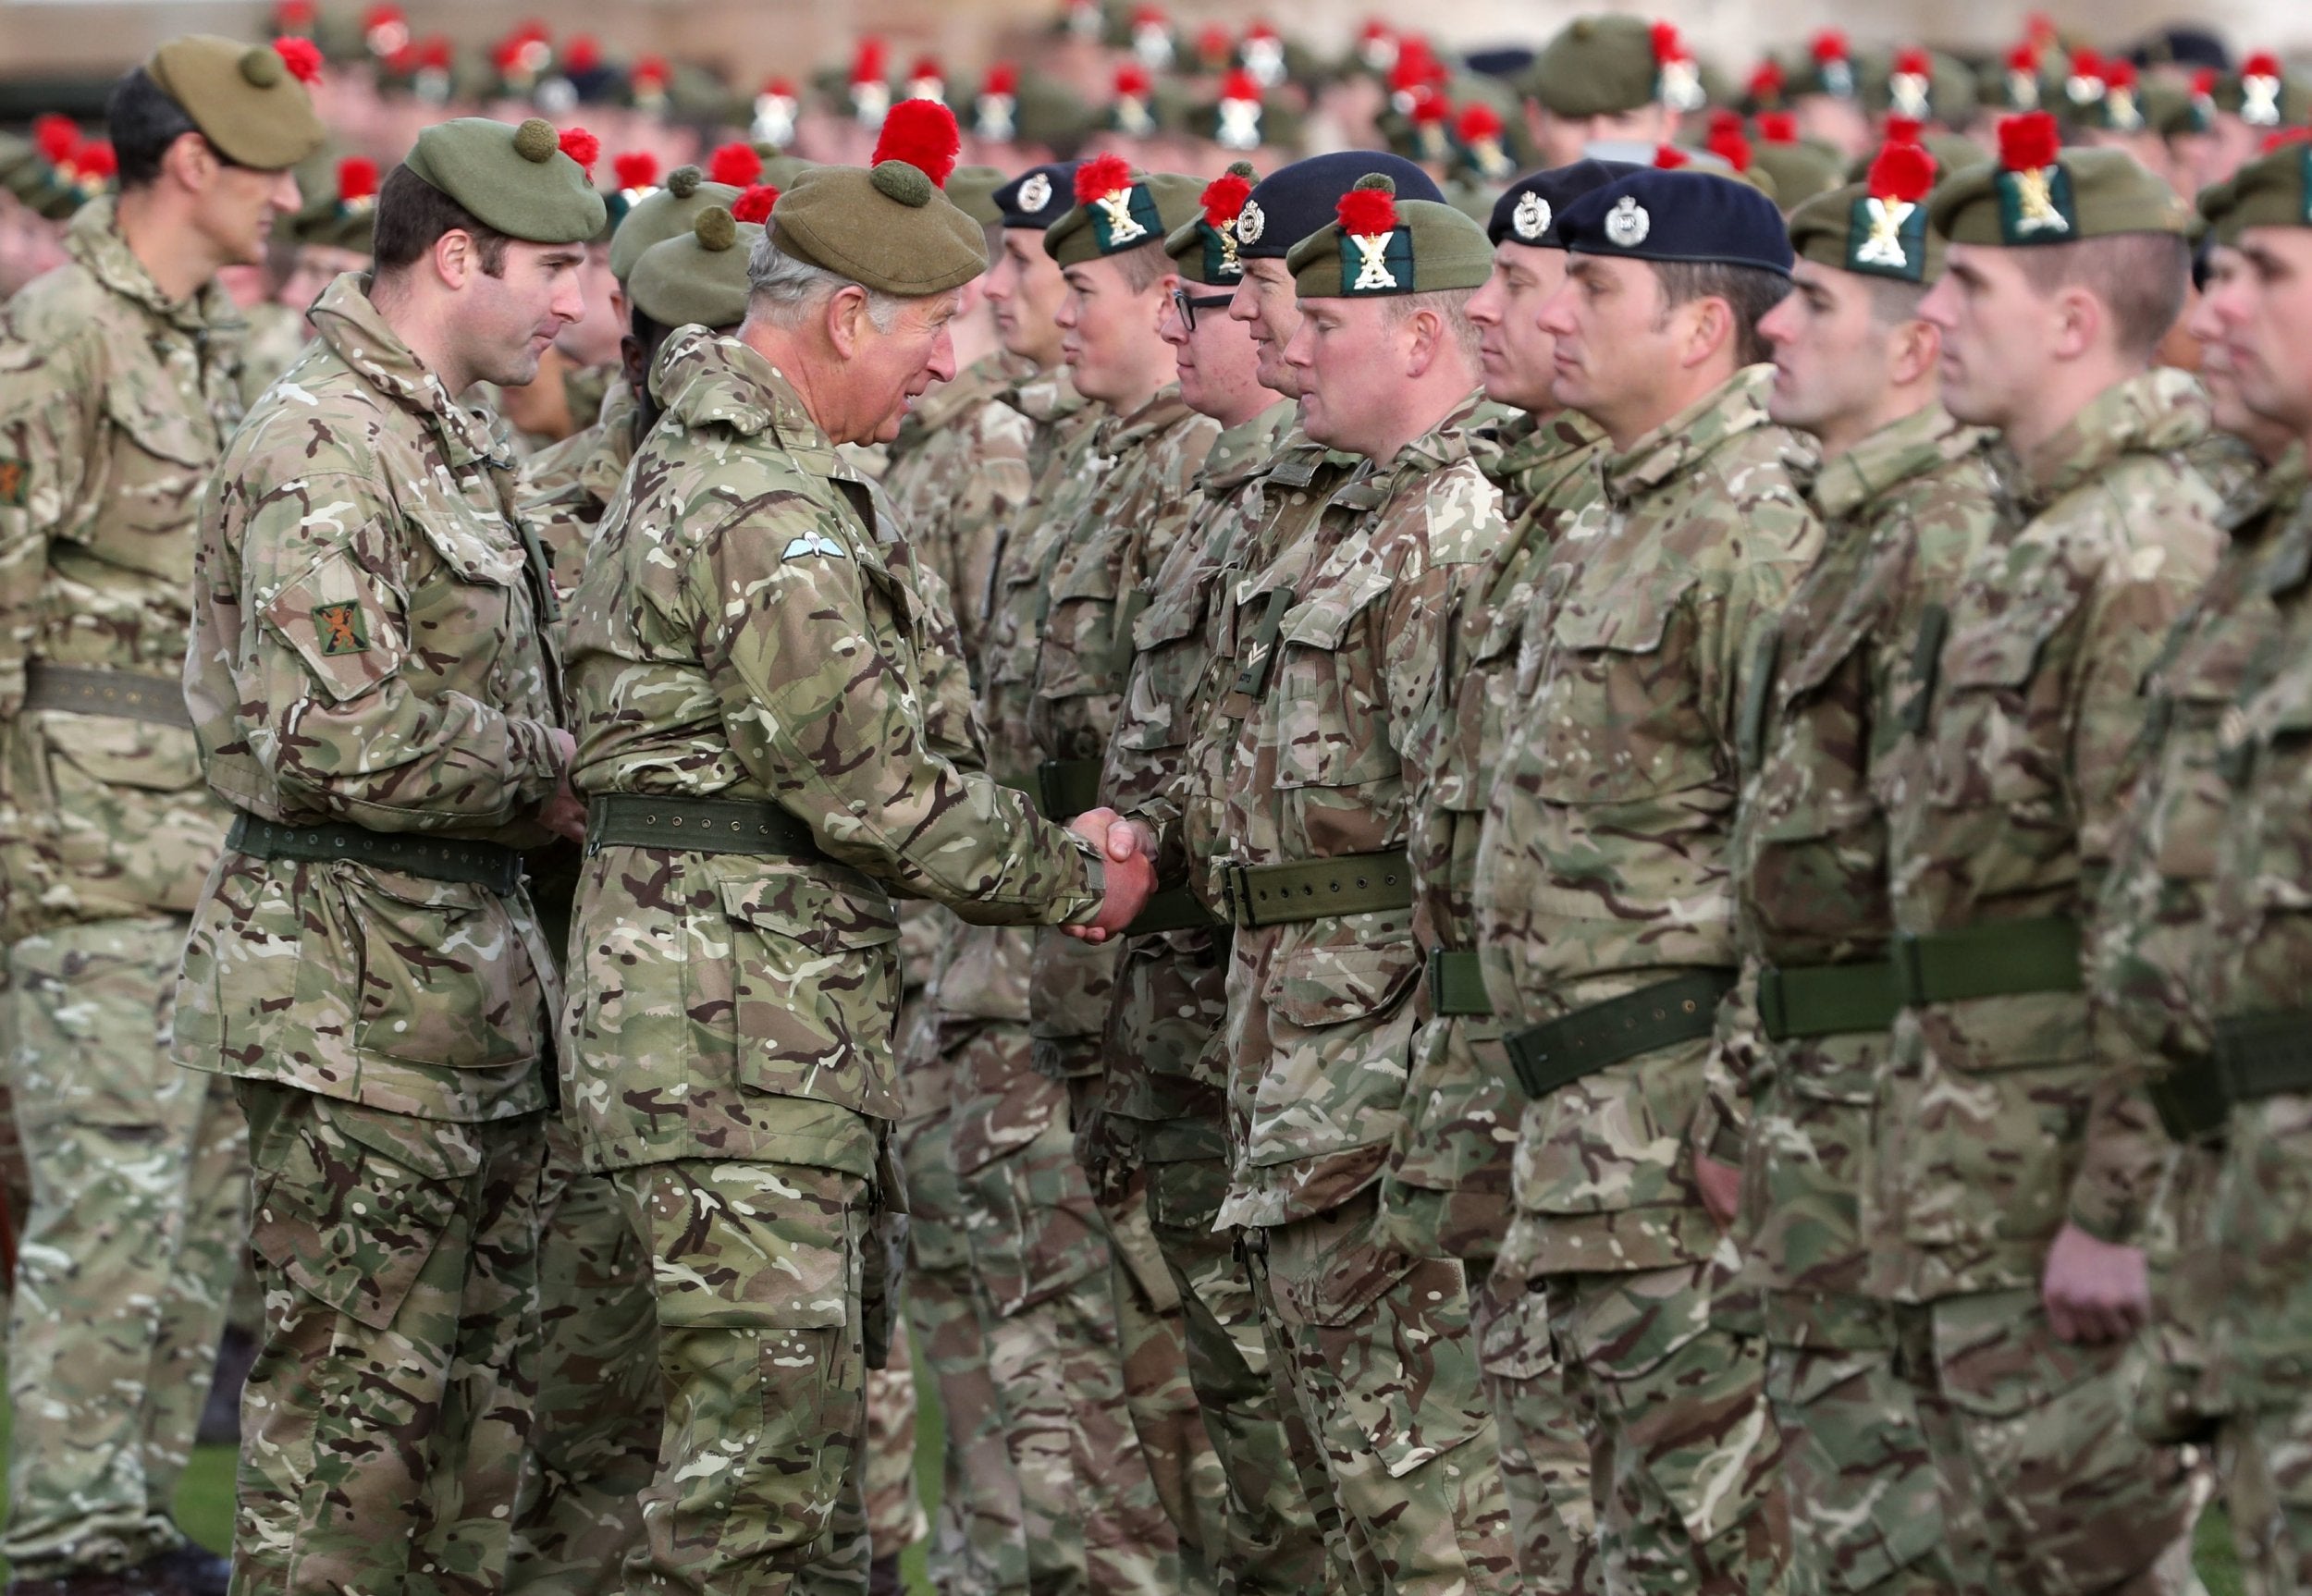 Prince Charles presents Iraq campaign medals to soldiers from The Black Watch, 3rd Battalion, The Royal Regiment of Scotland, in September 2018